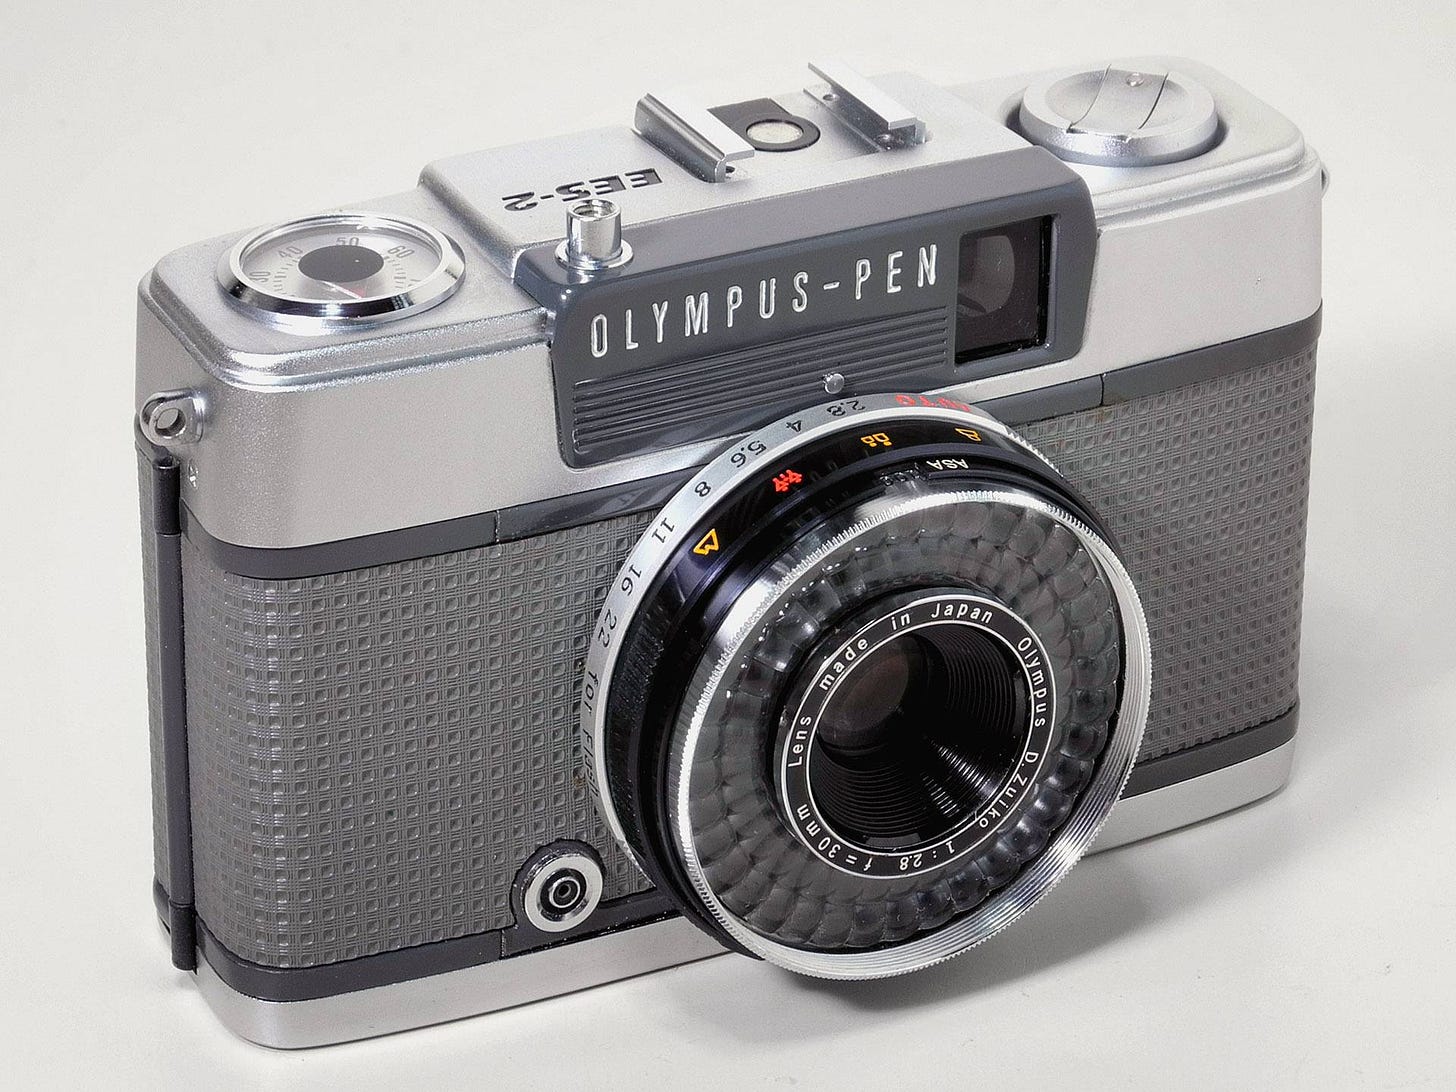 An image of the Olympus Pen EES-2 camera